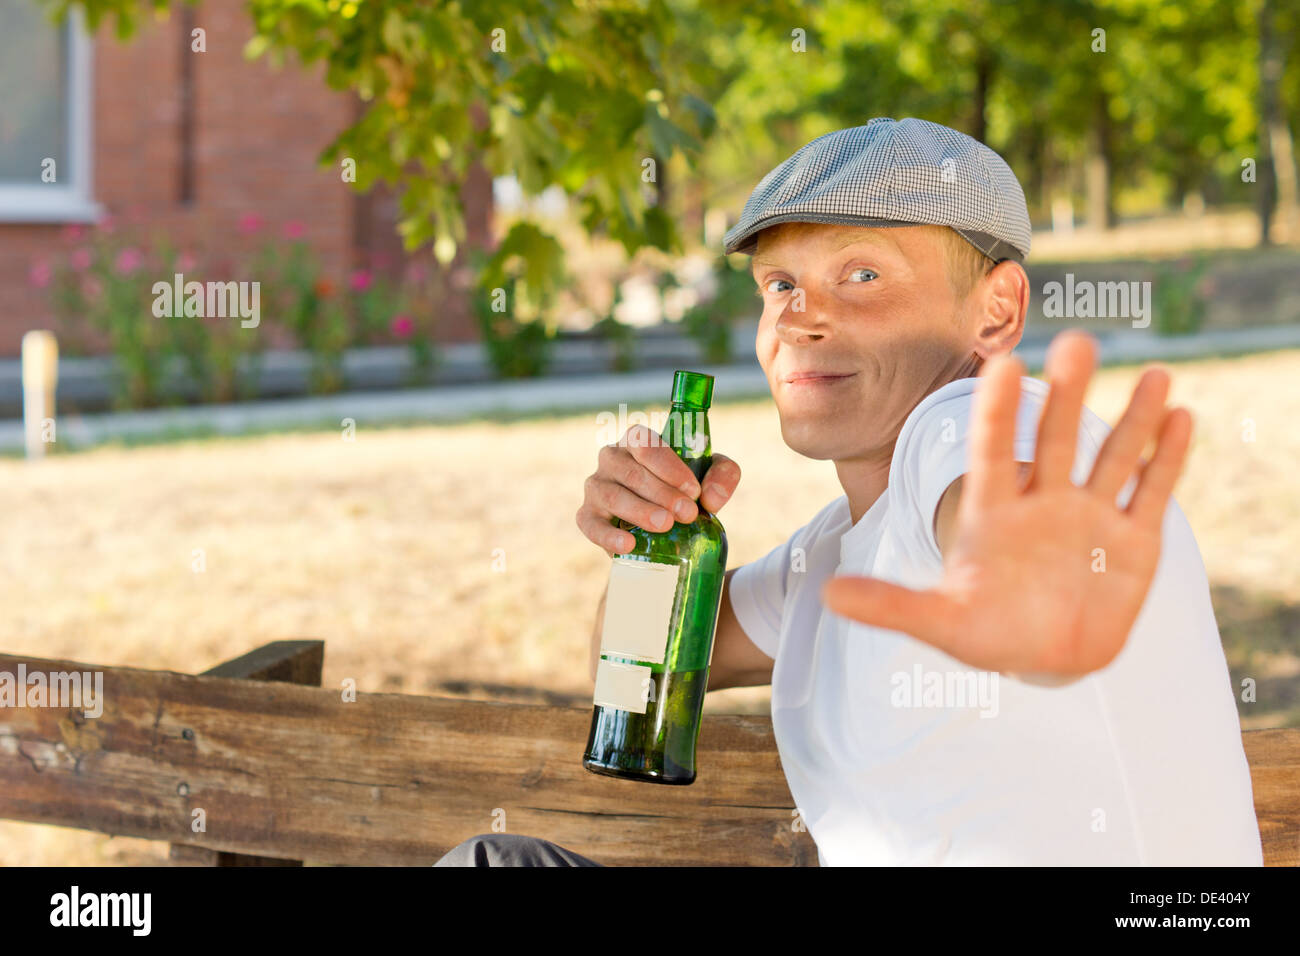 Alcoholic protecting his privacy pushing out his hand in a Stop gesture while pulling back with his bottle of booze Stock Photo